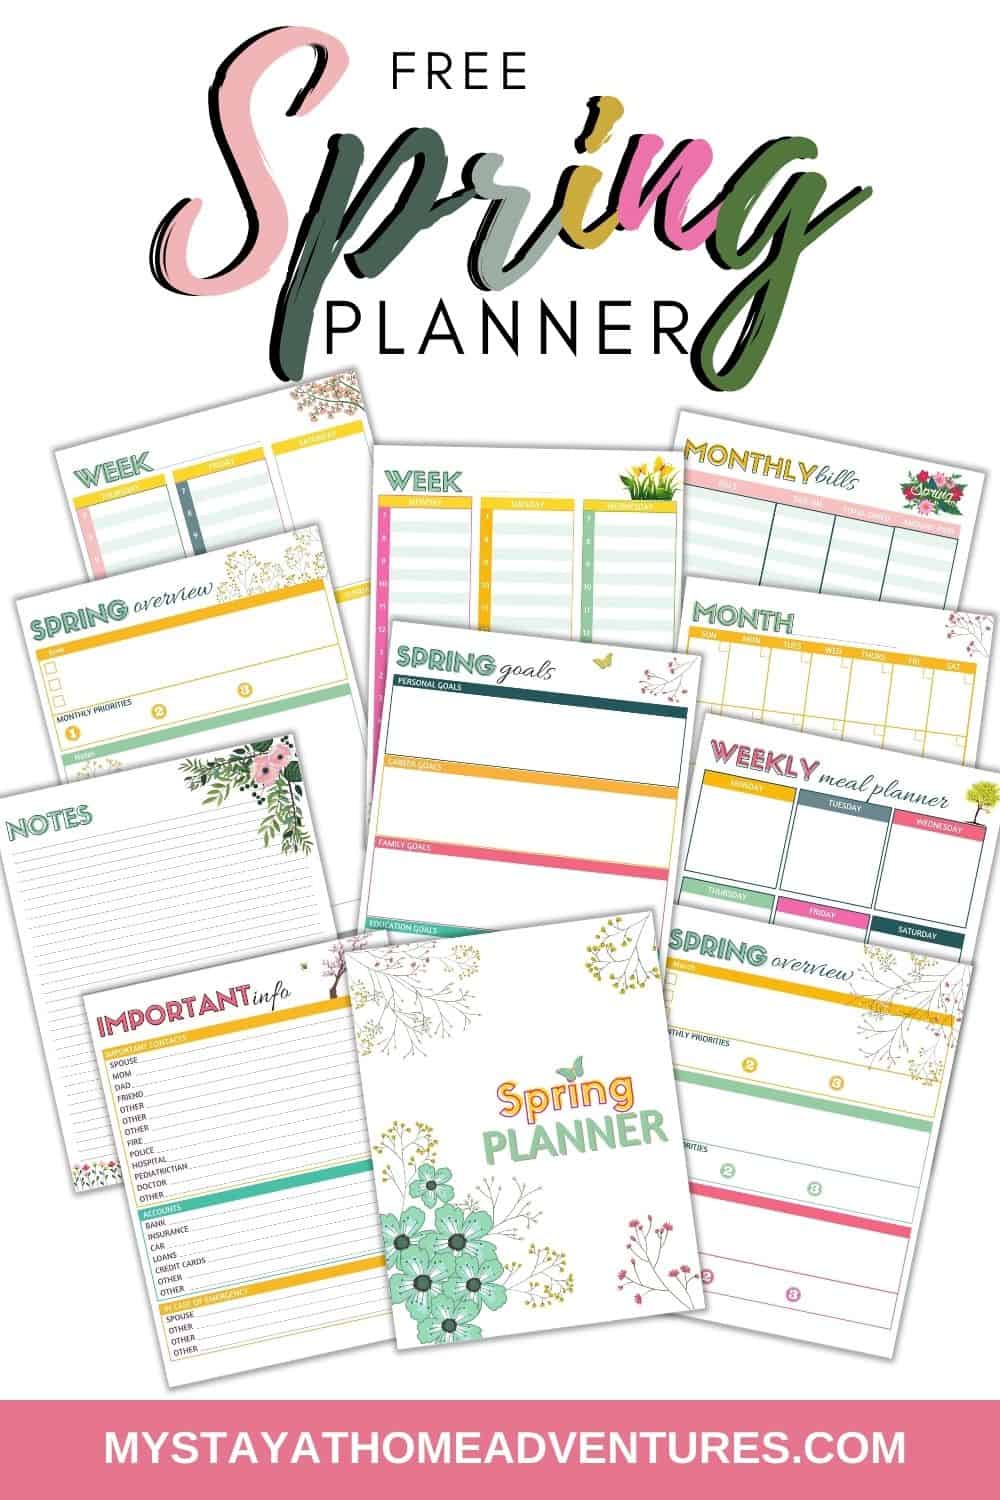 Get spring organized with this 12-page free spring-themed planner. Digital download product that comes with blank calendar to meal planning. #freeplanner #freespringplanner #planning #planner via @mystayathome